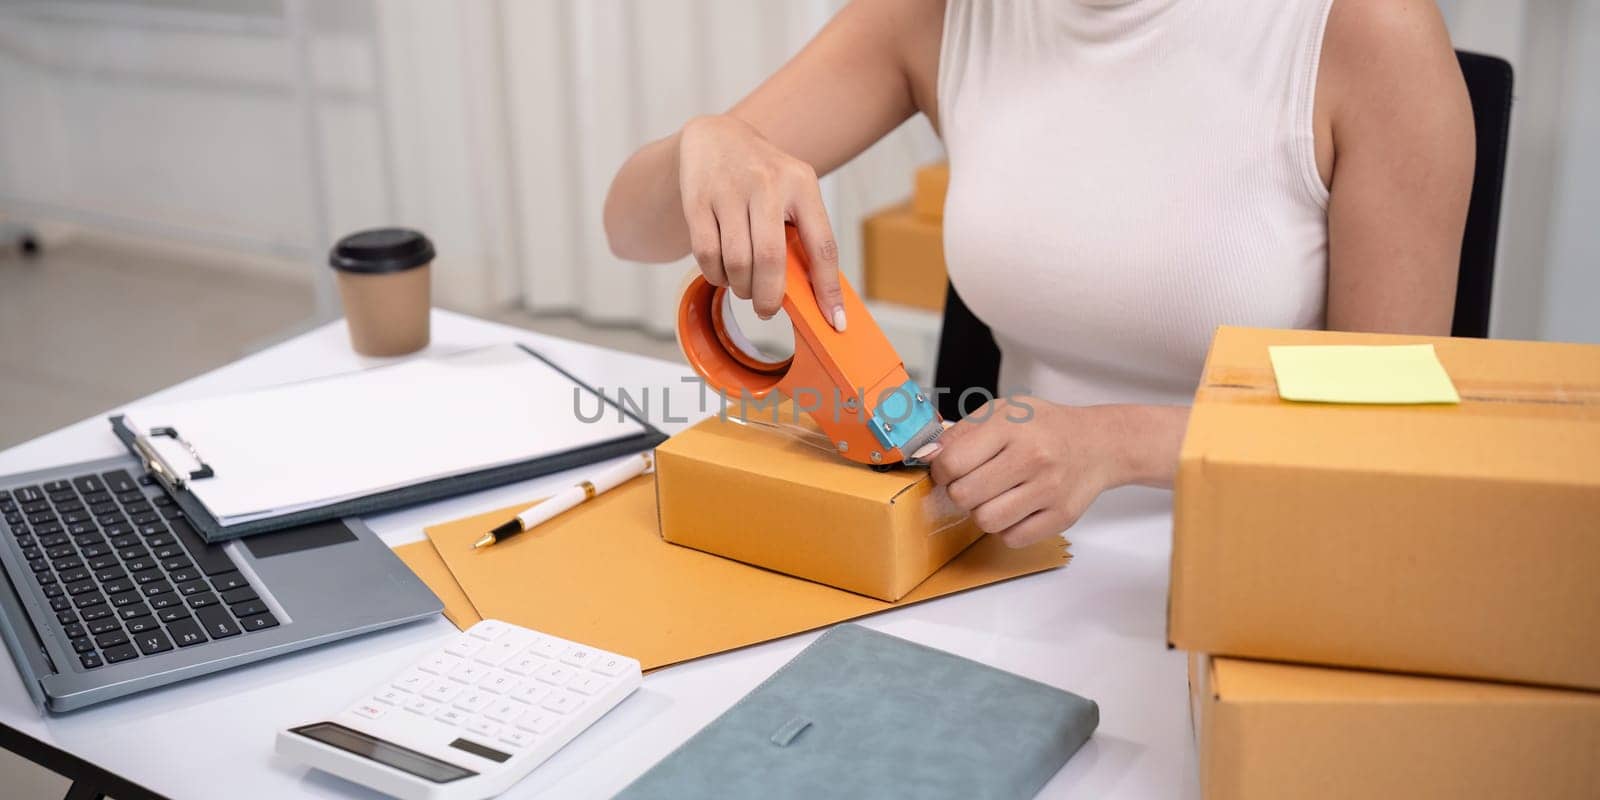 Woman asian use scotch tape to attach parcel boxes to prepare goods for the process of packaging, shipping, online sale internet marketing ecommerce concept startup business idea by nateemee